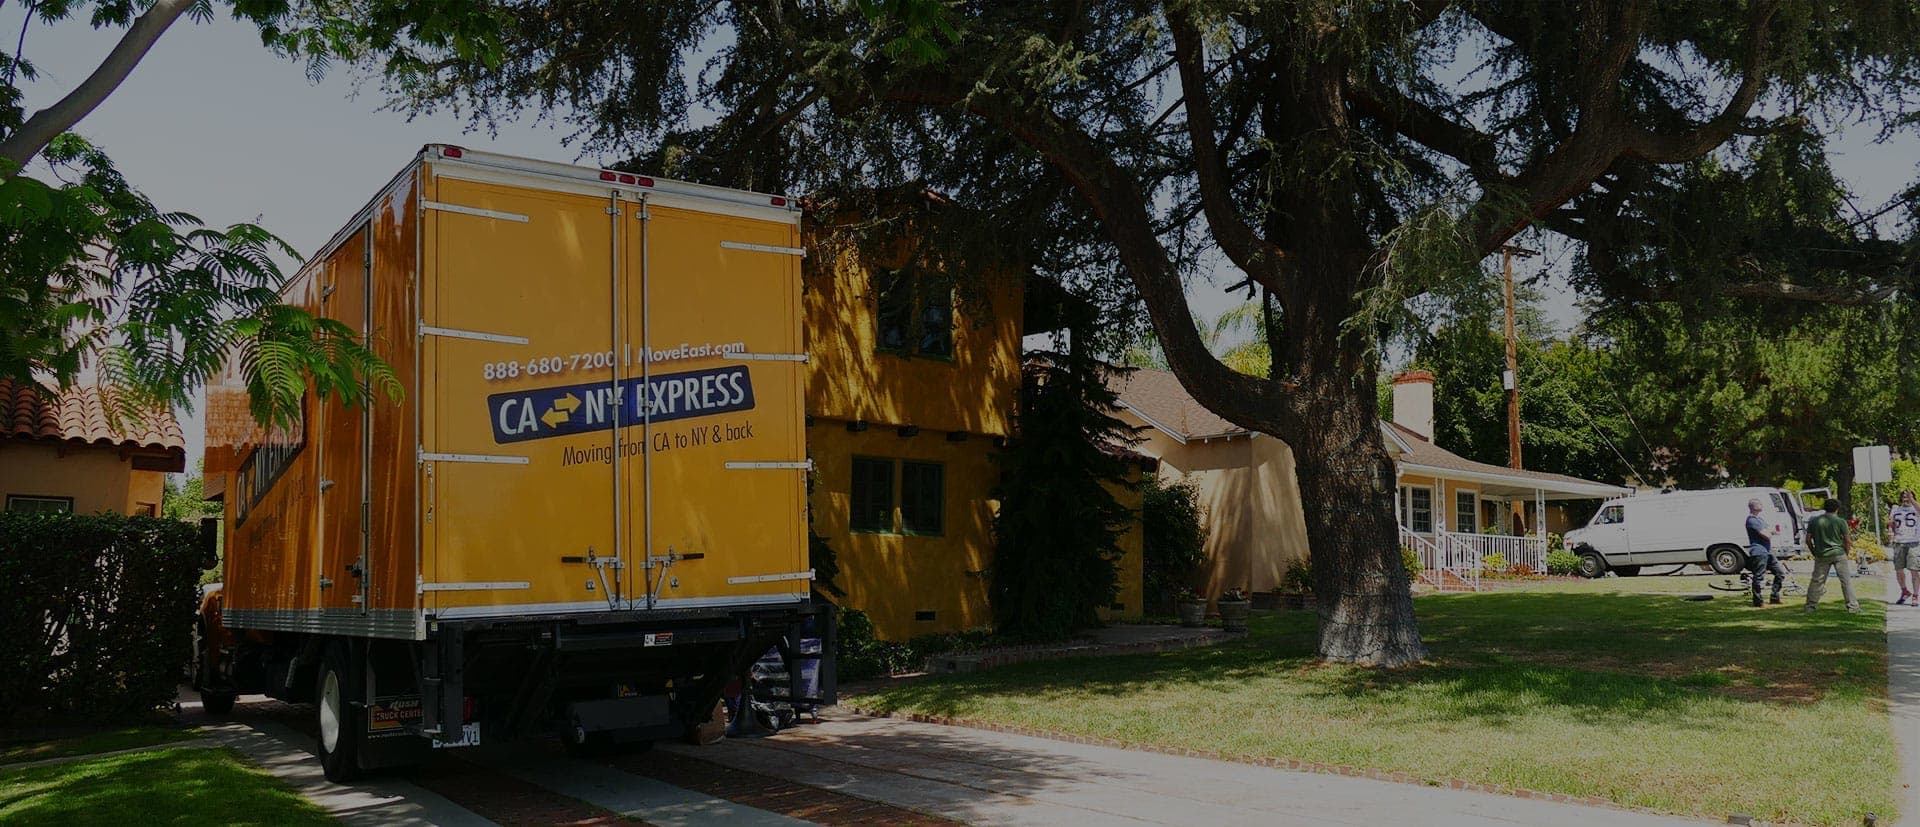 california long distance moving Companies and tax deductions